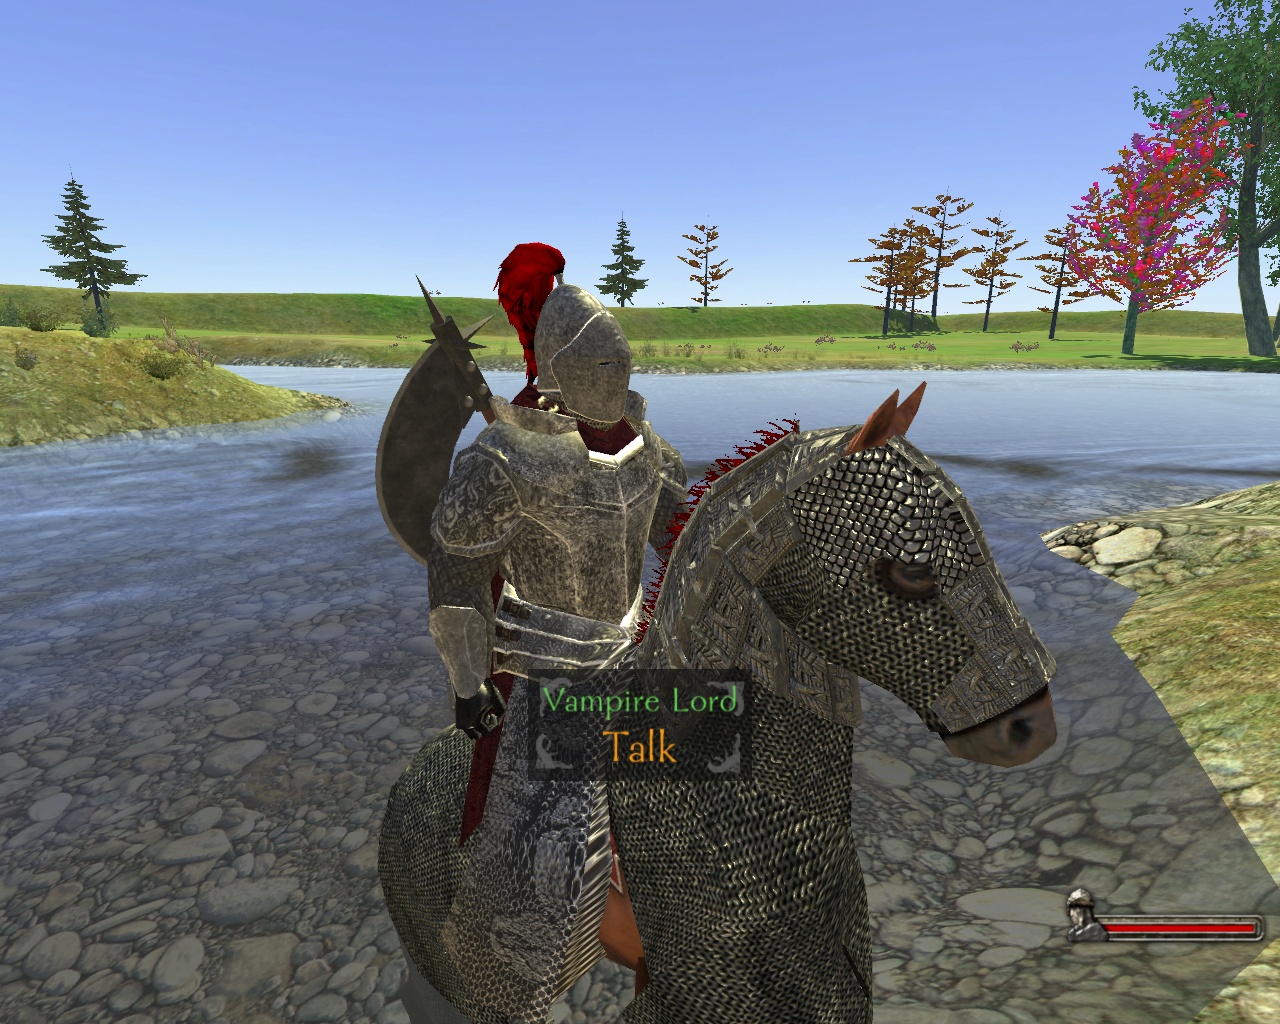 New Images And Artwork Paradigm Worlds Mod For Mount Blade Warband